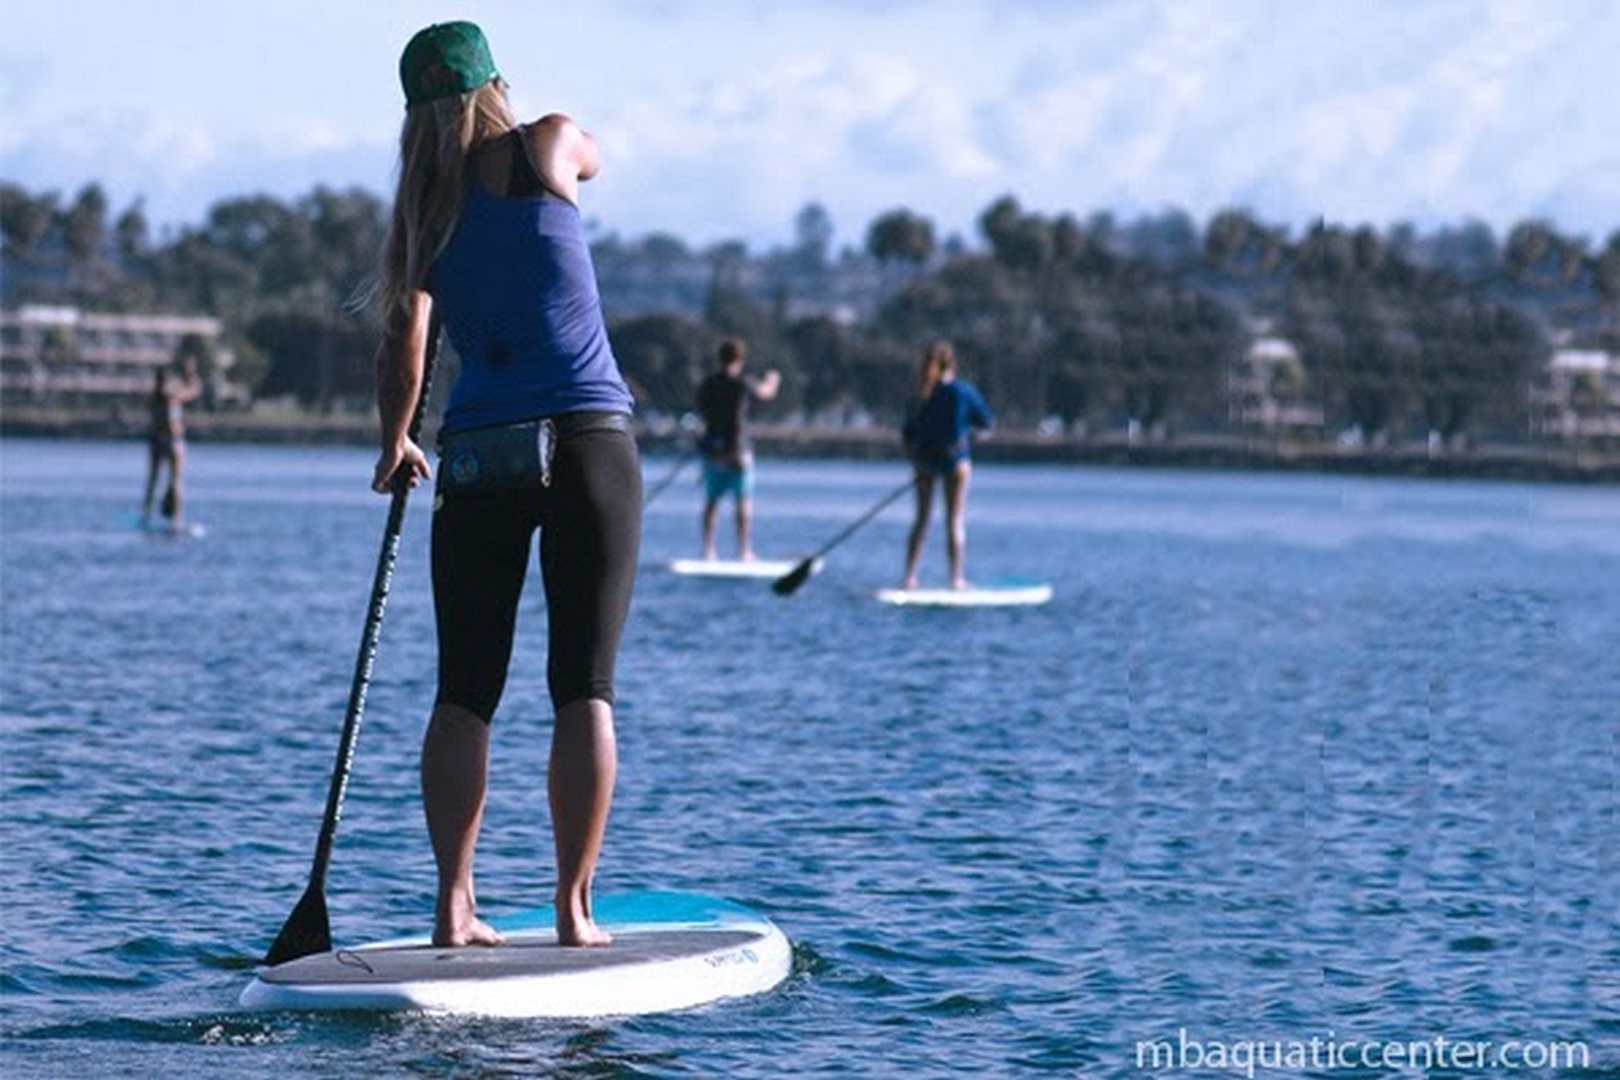 Stand up paddle boards are popular